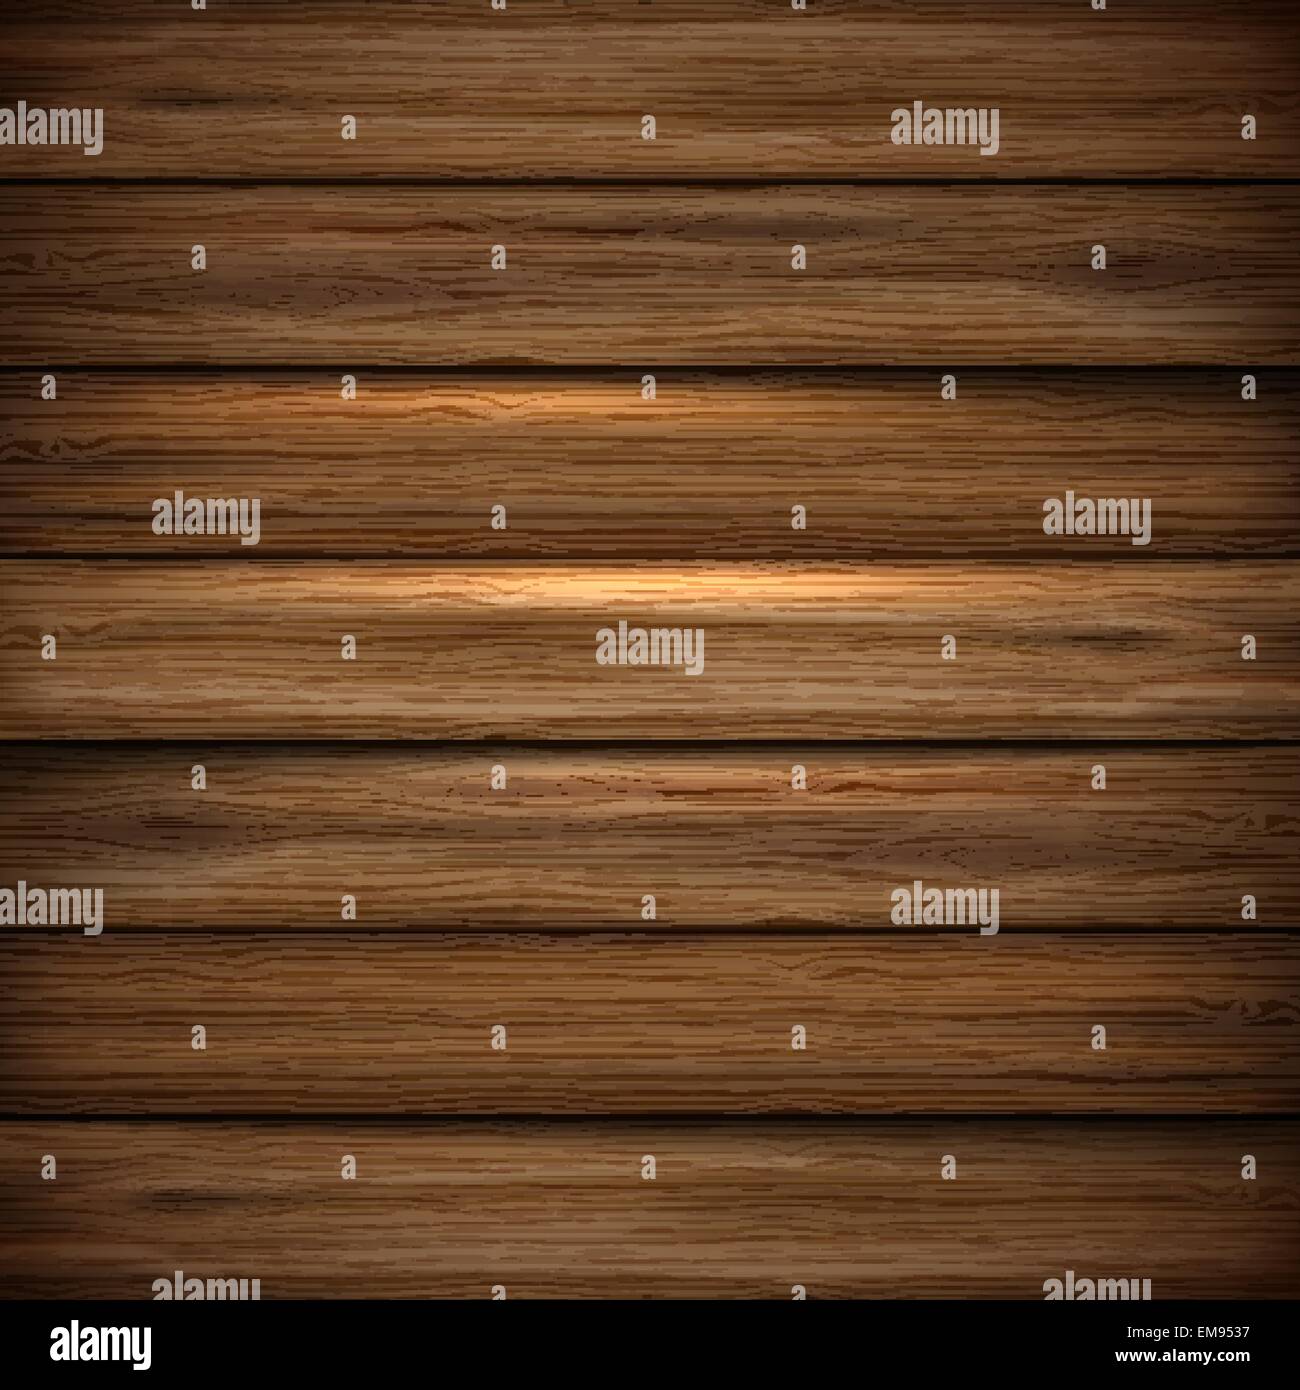 Illustrated wood parquet texture. Stock Vector